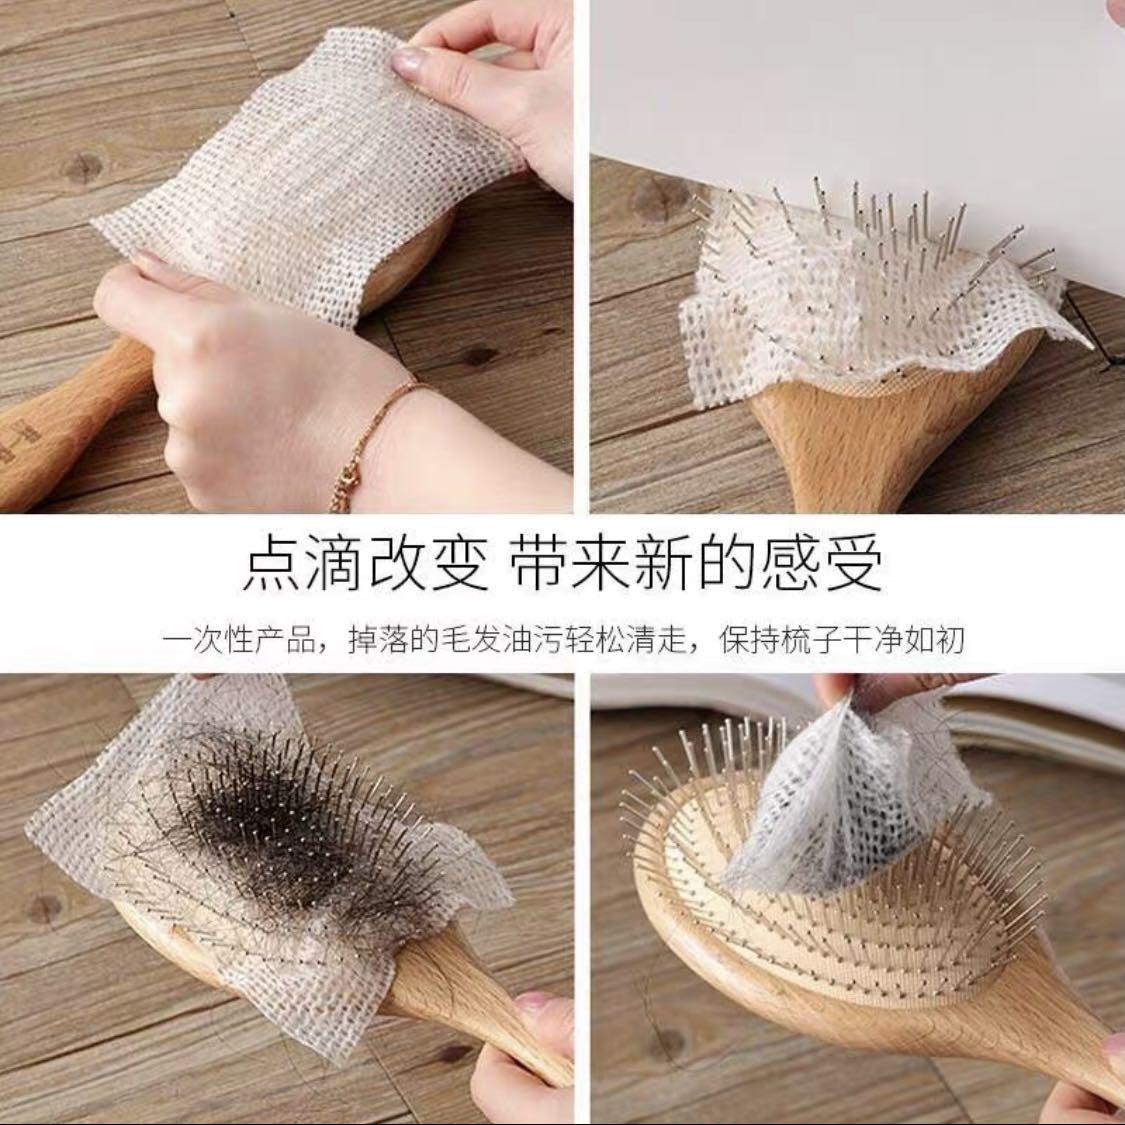 50pcs Hairbrush Cleaner Tool Set For Cushion Brush, Air Cushion Comb,  Cylinder Brush, Round Brush Including Cleaning Paper